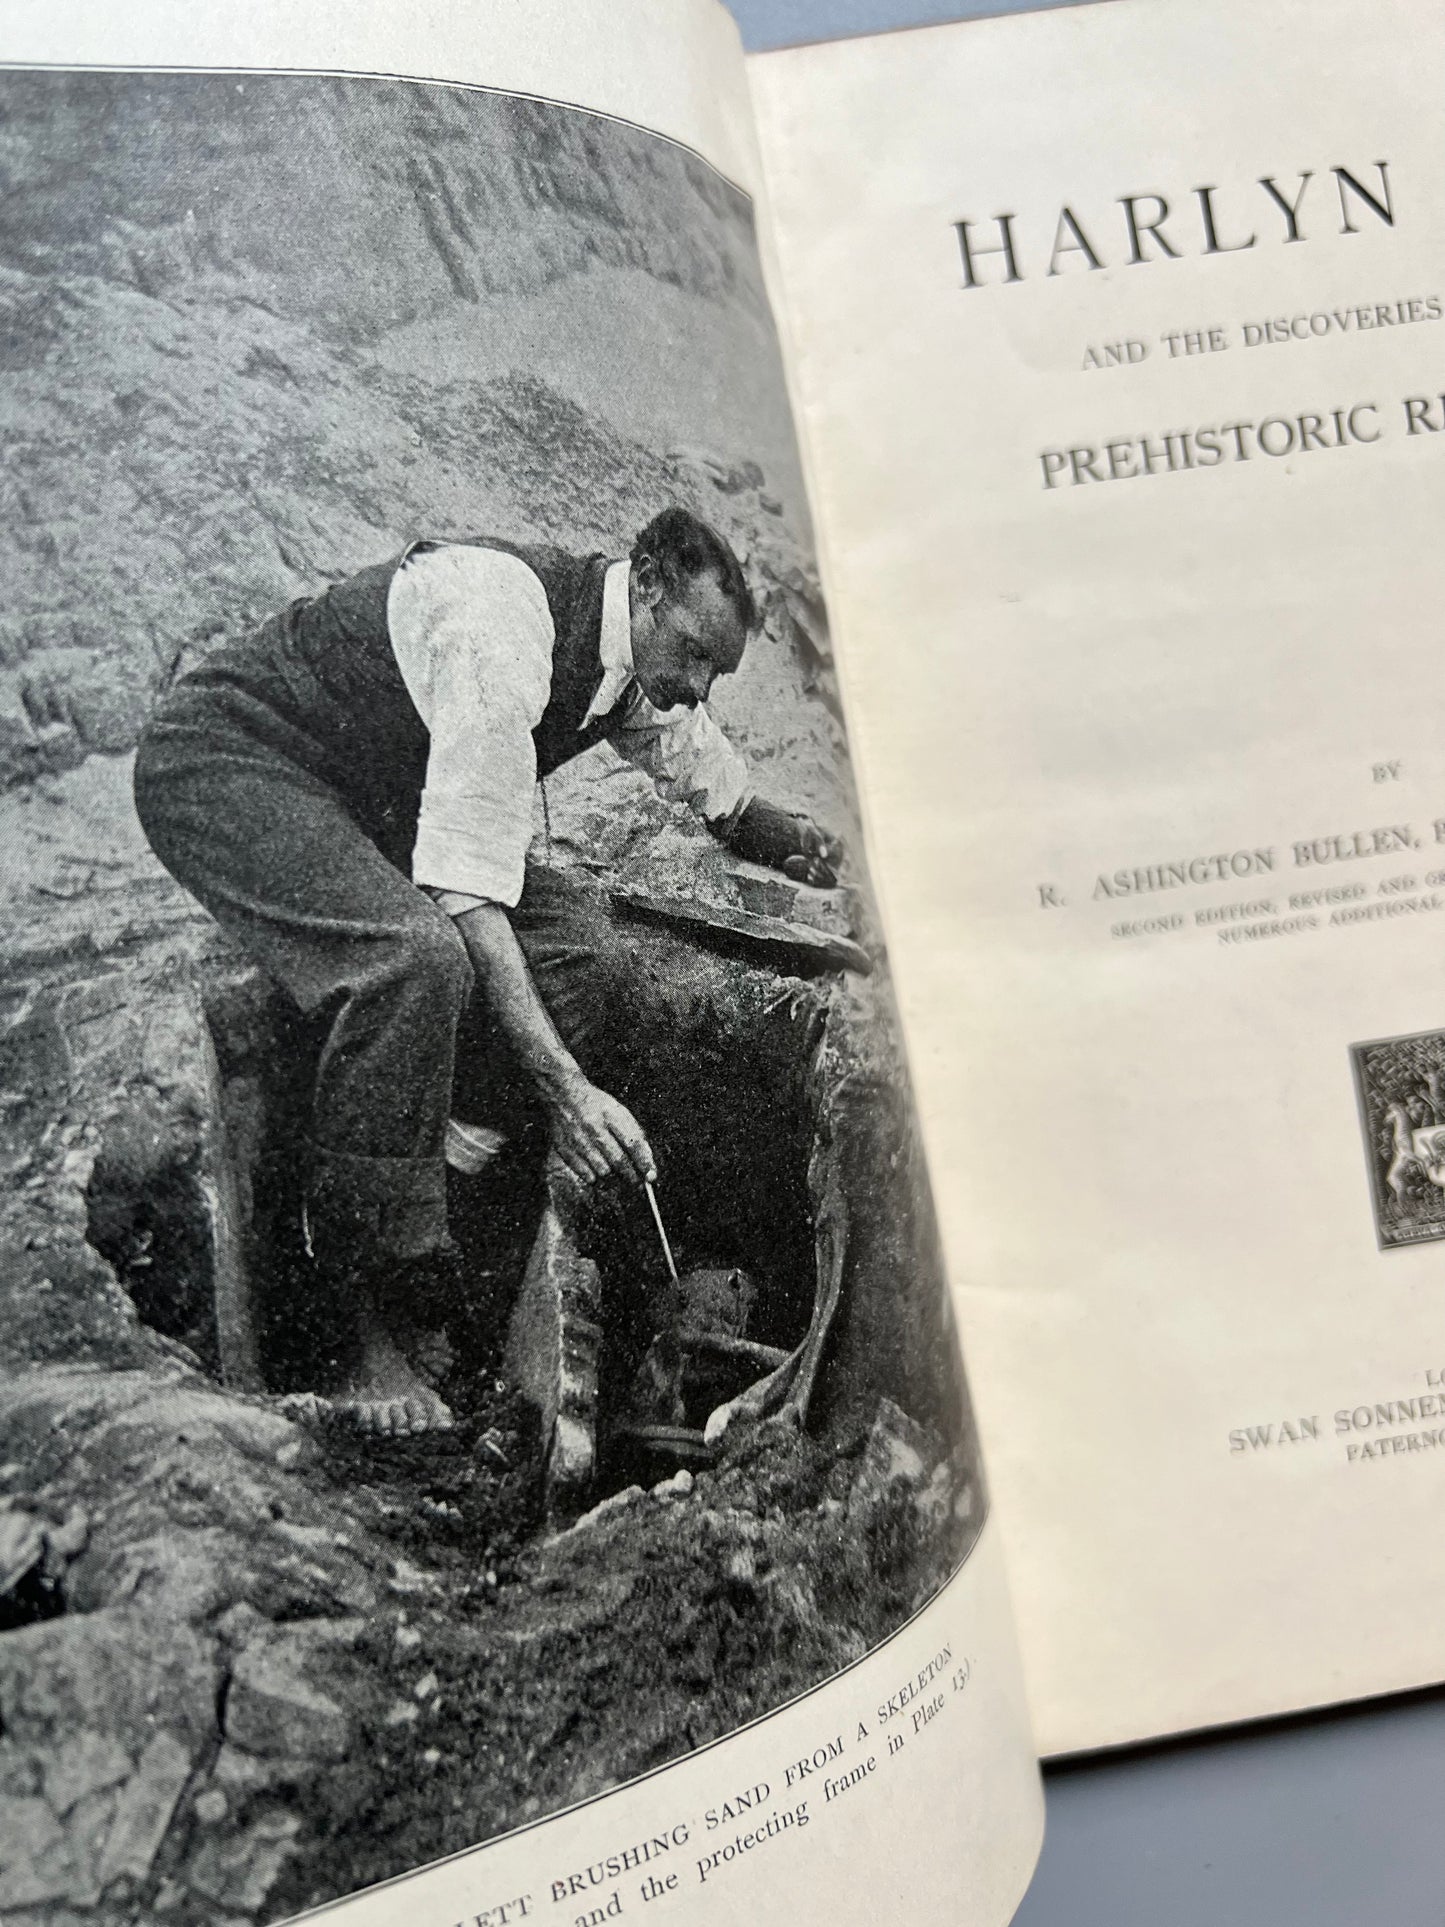 Harlyn Bay and its the discovery of its prehistoric remains, R. Ashington Bullen - Swan Sonnenschein & Co, 1902